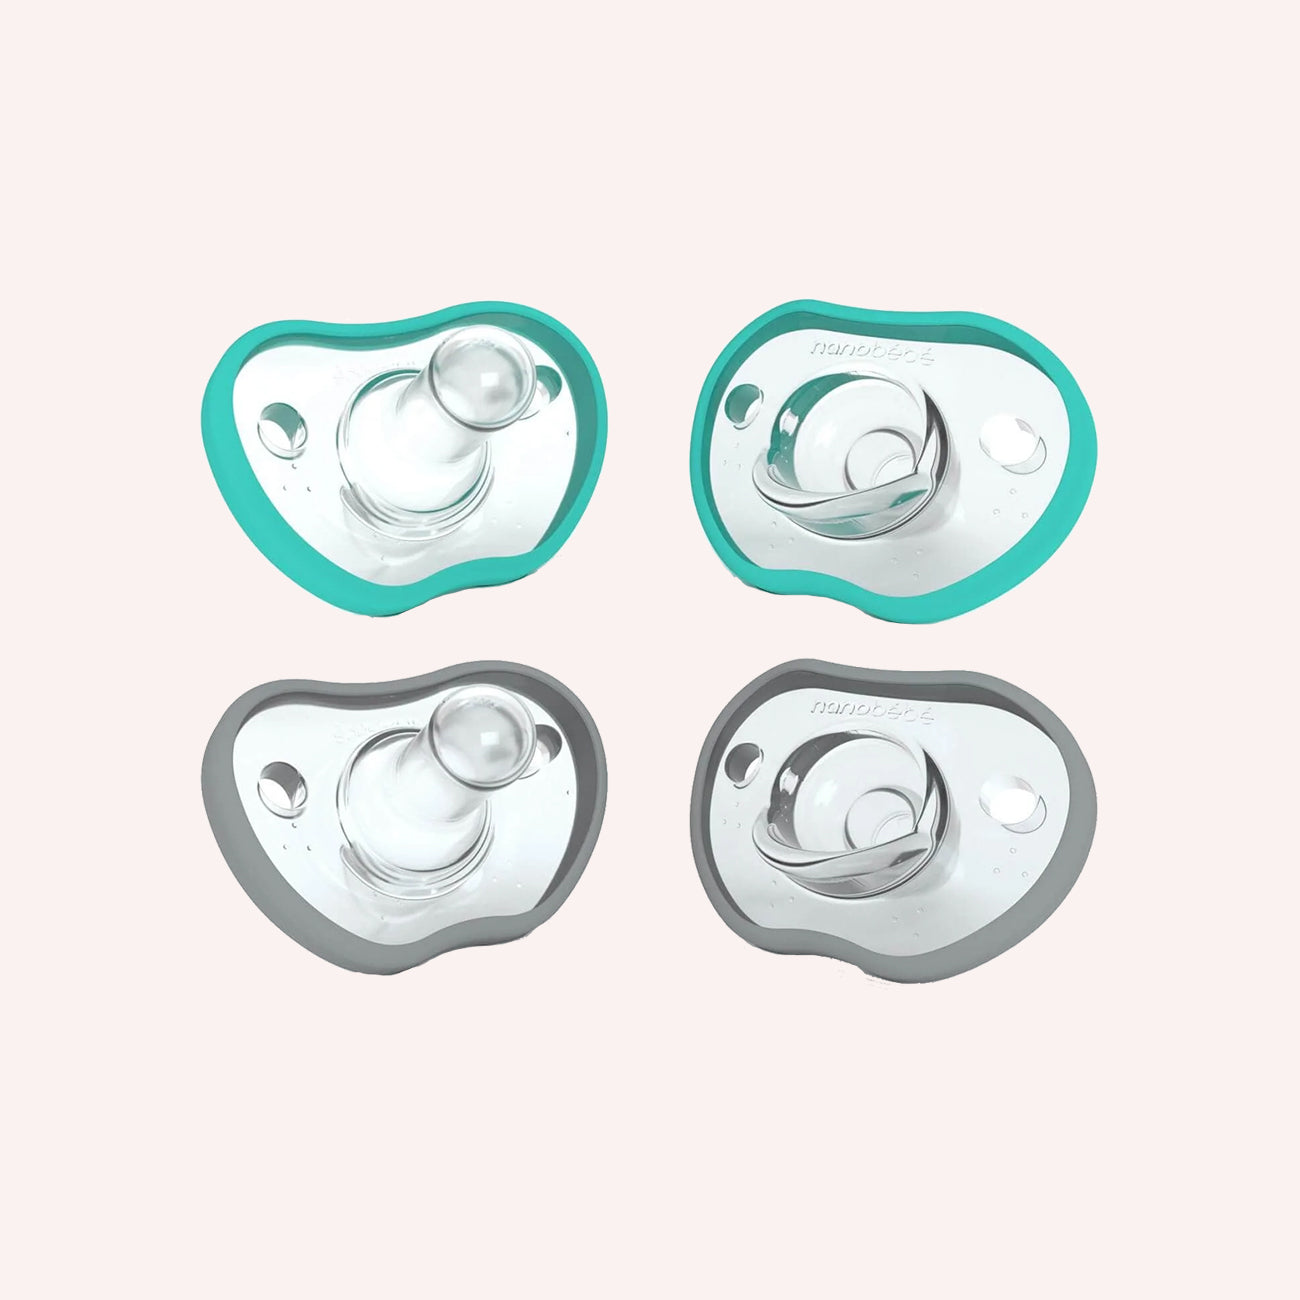 Flexy Pacifier 4 Pack - Grey/Teal